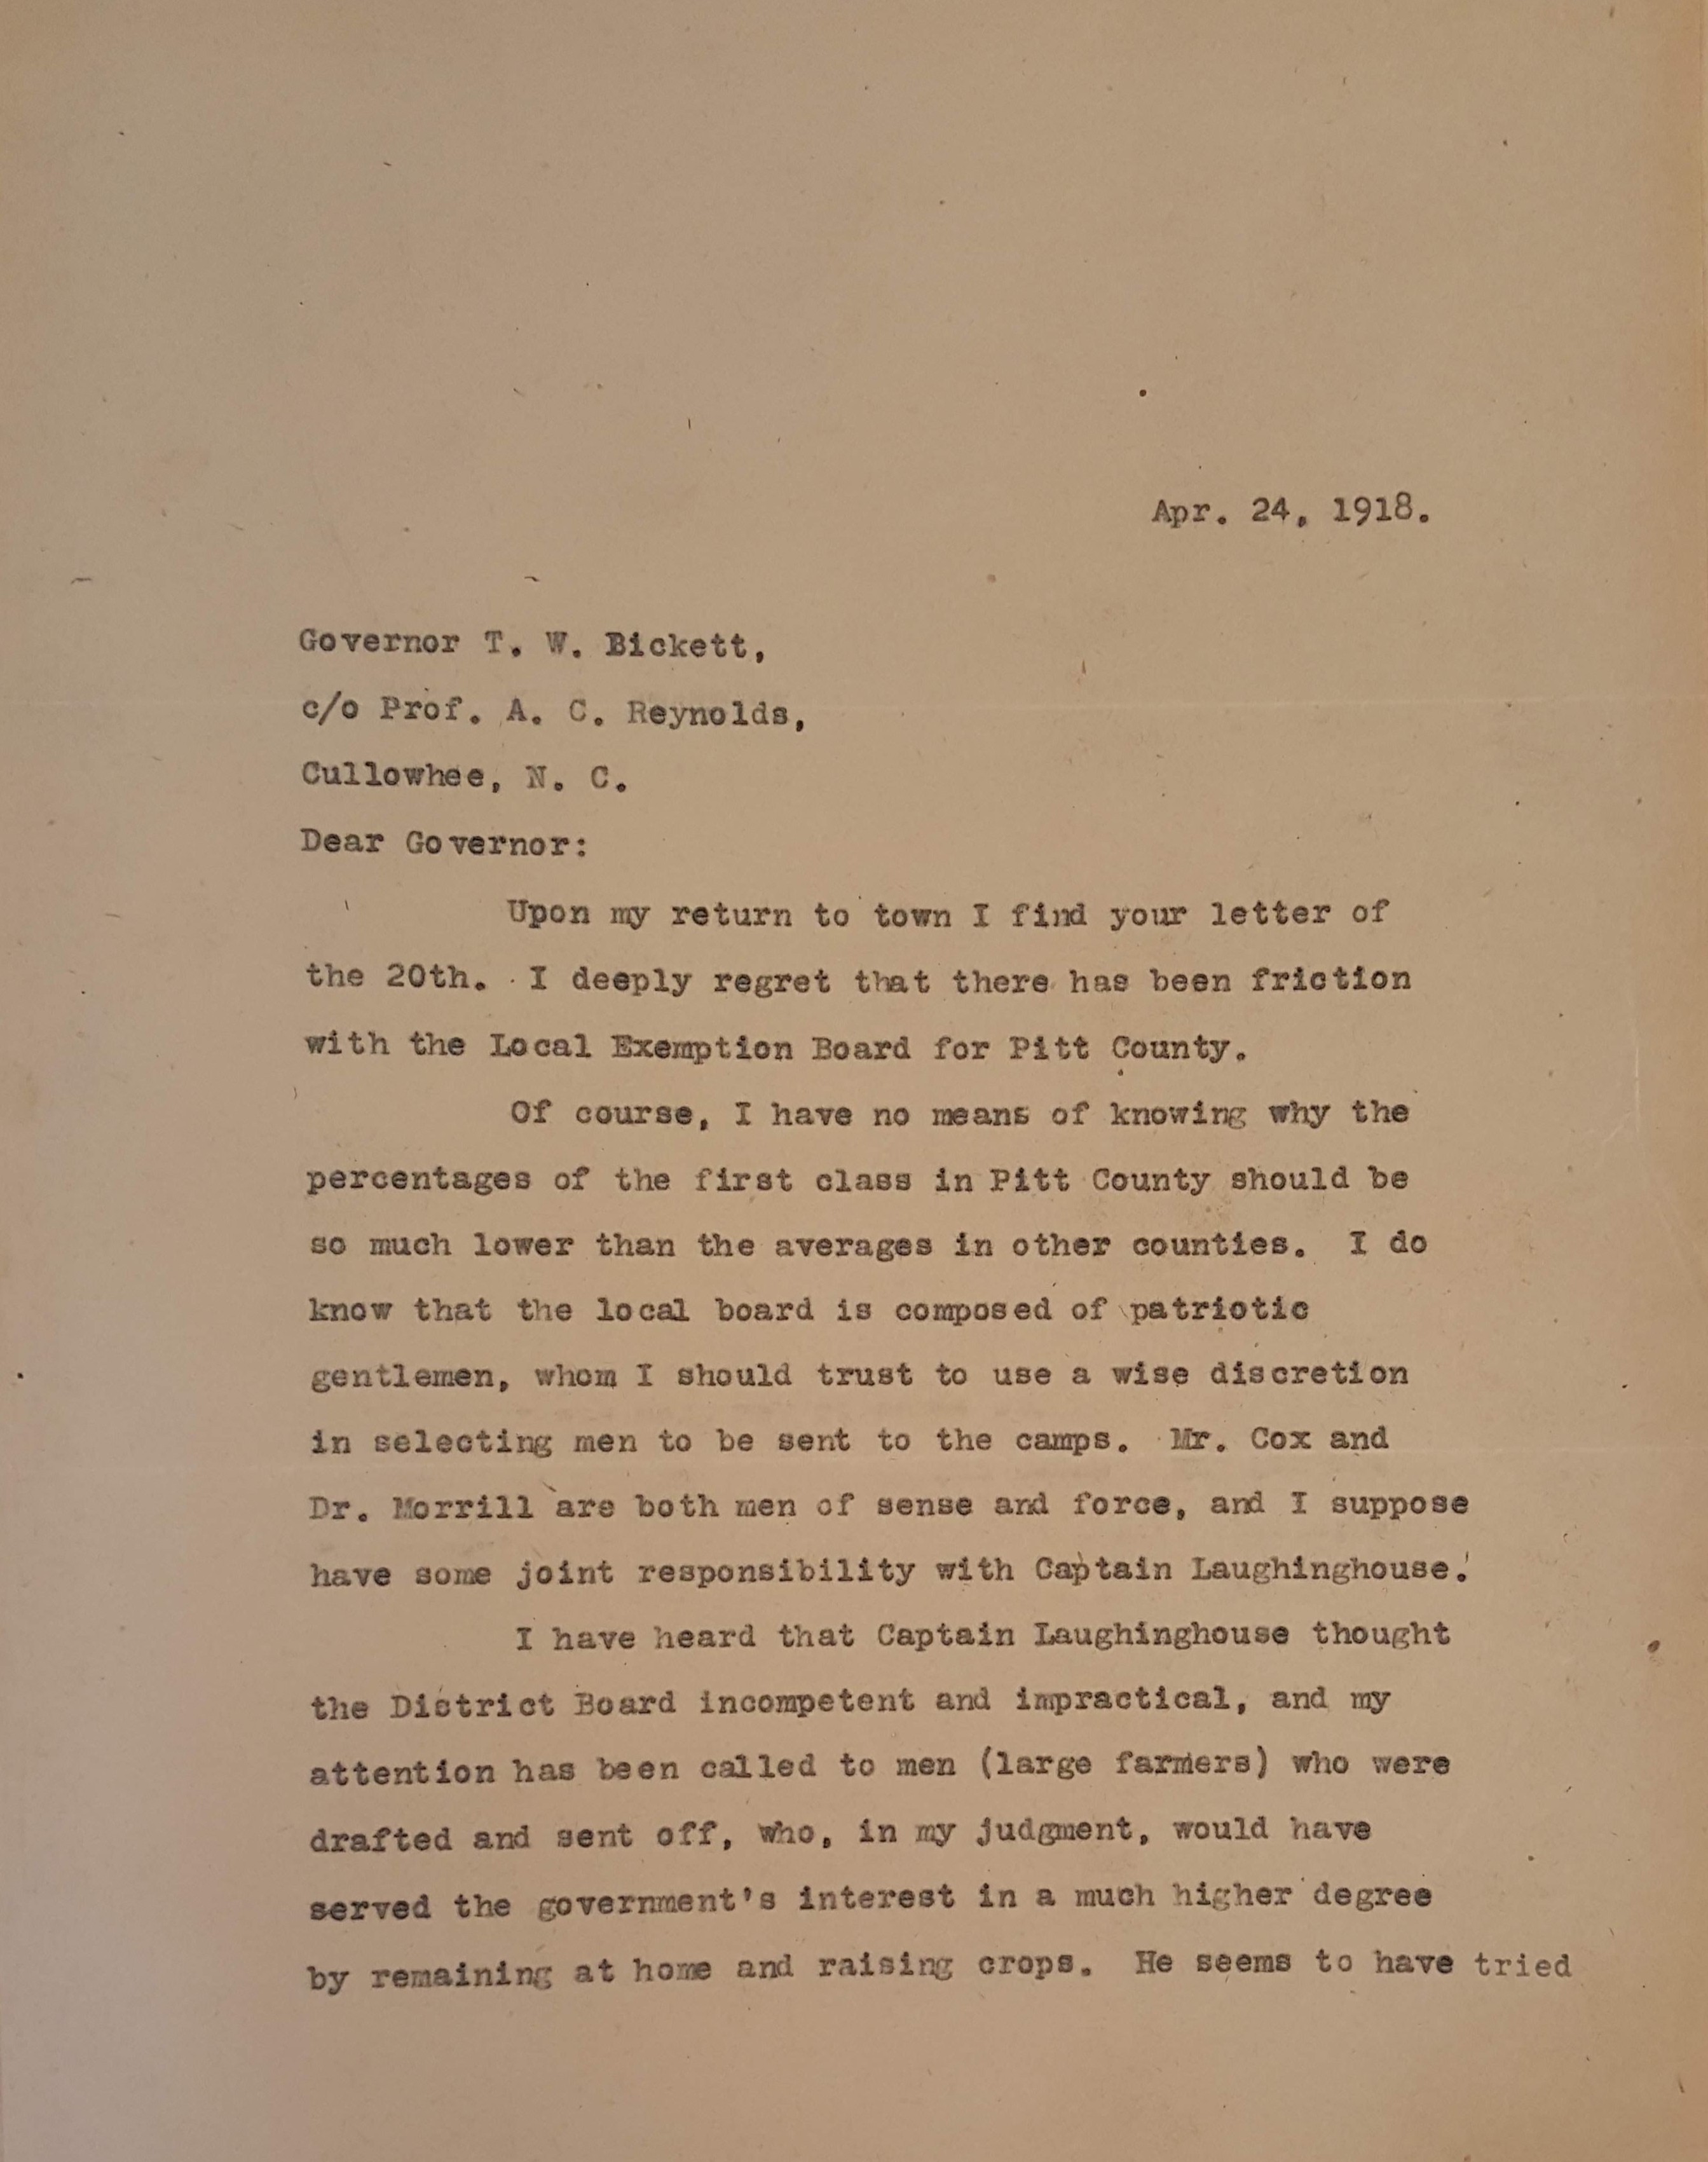 Letter from J. Bryan Grimes to Thomas W. Bickett, April 24, 1918, page 1